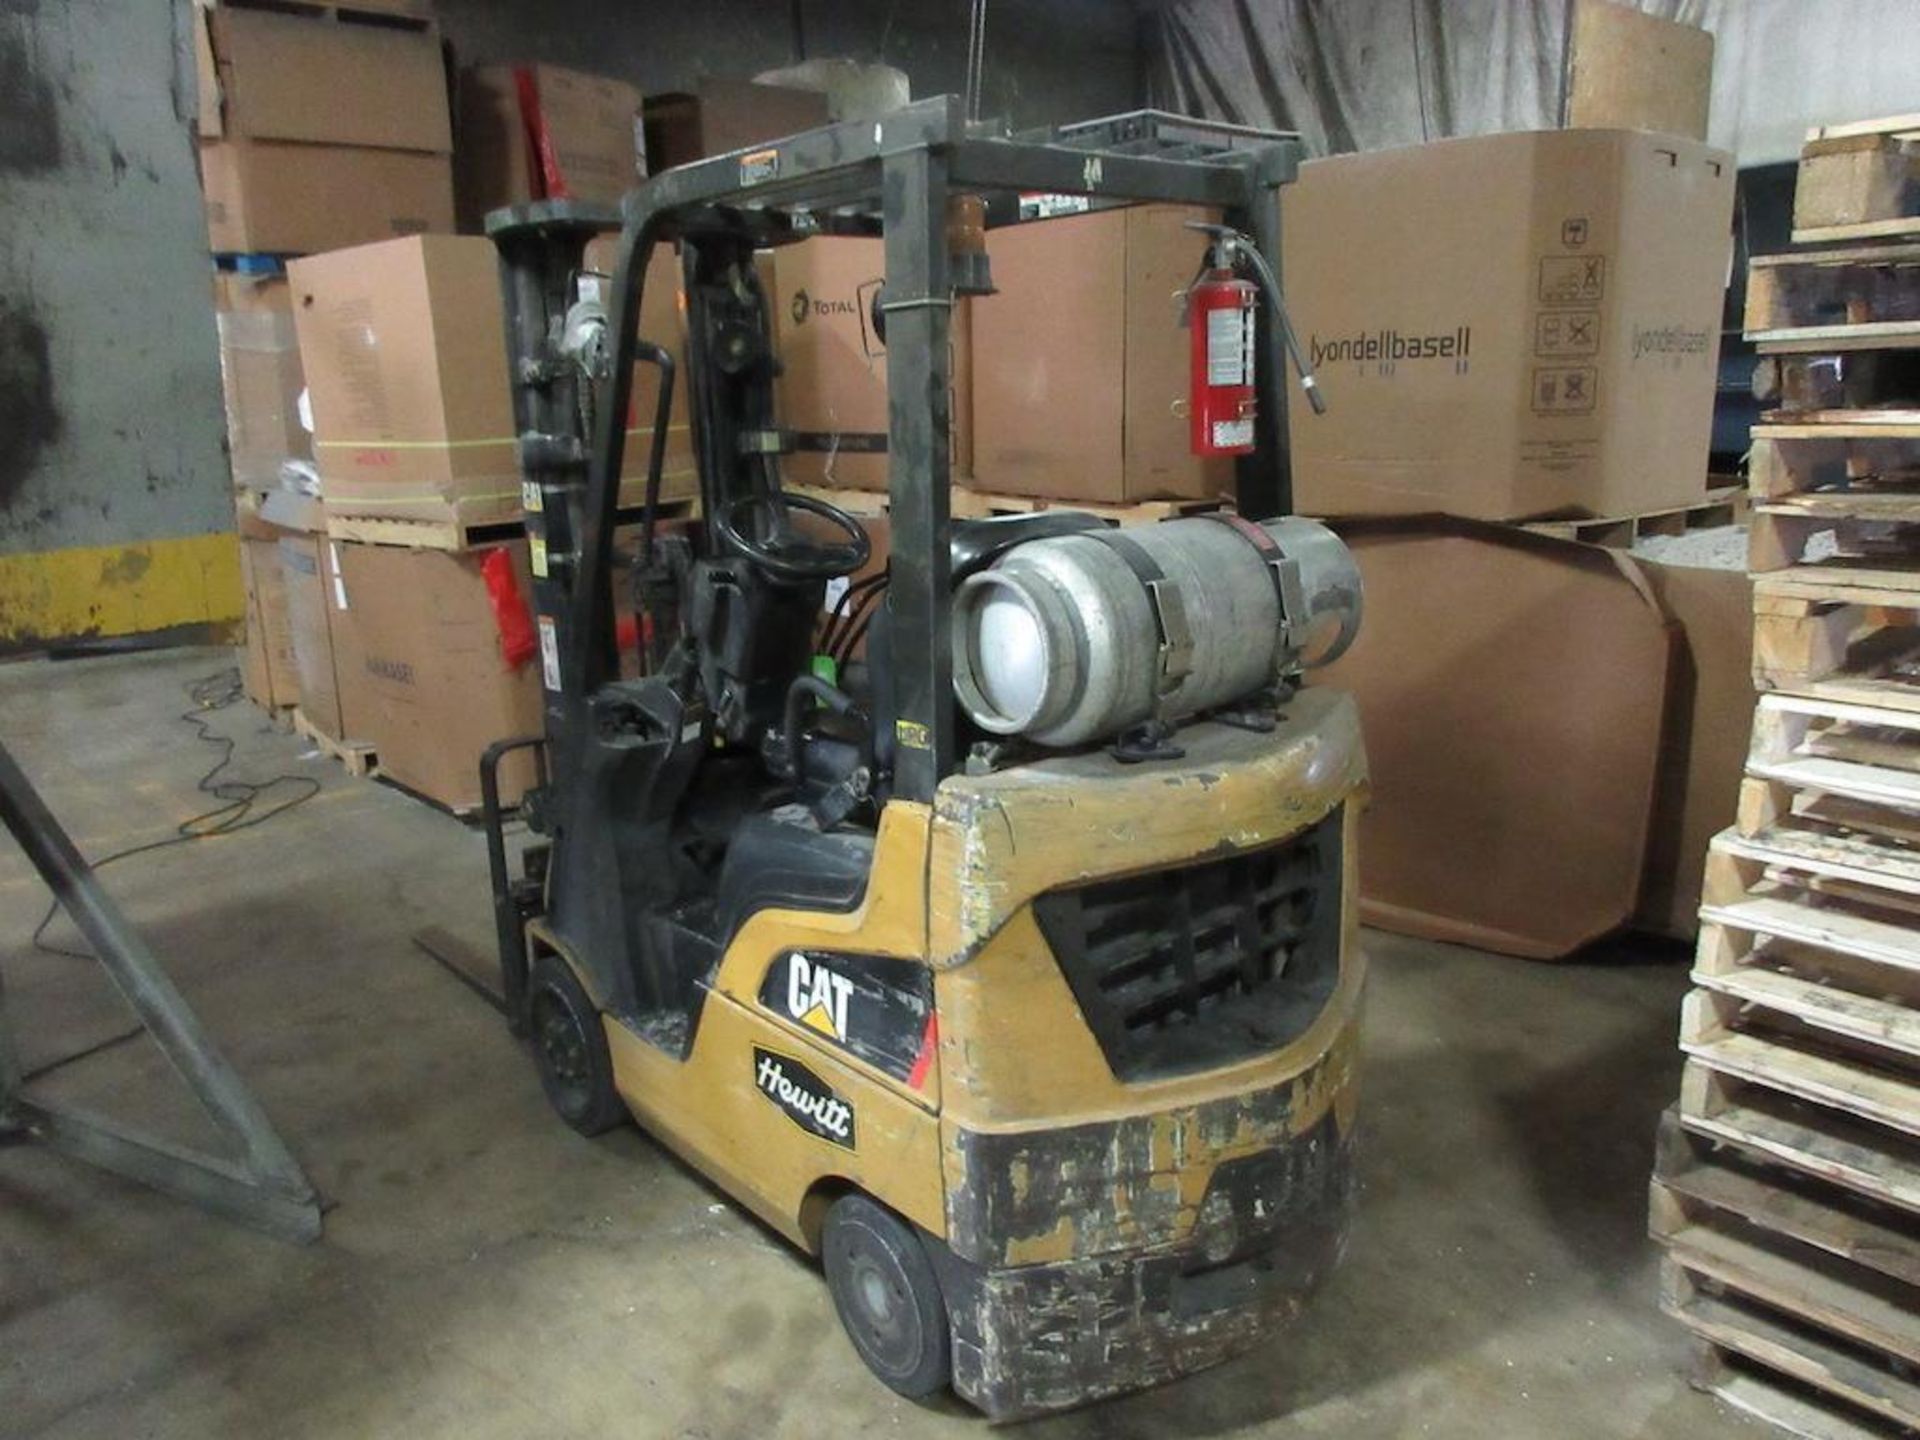 CAT model C30001, 2,500 lb capacity LPG forklift, 3 stage mast,9444 hours indicated, sn AT81F10136, - Image 6 of 6